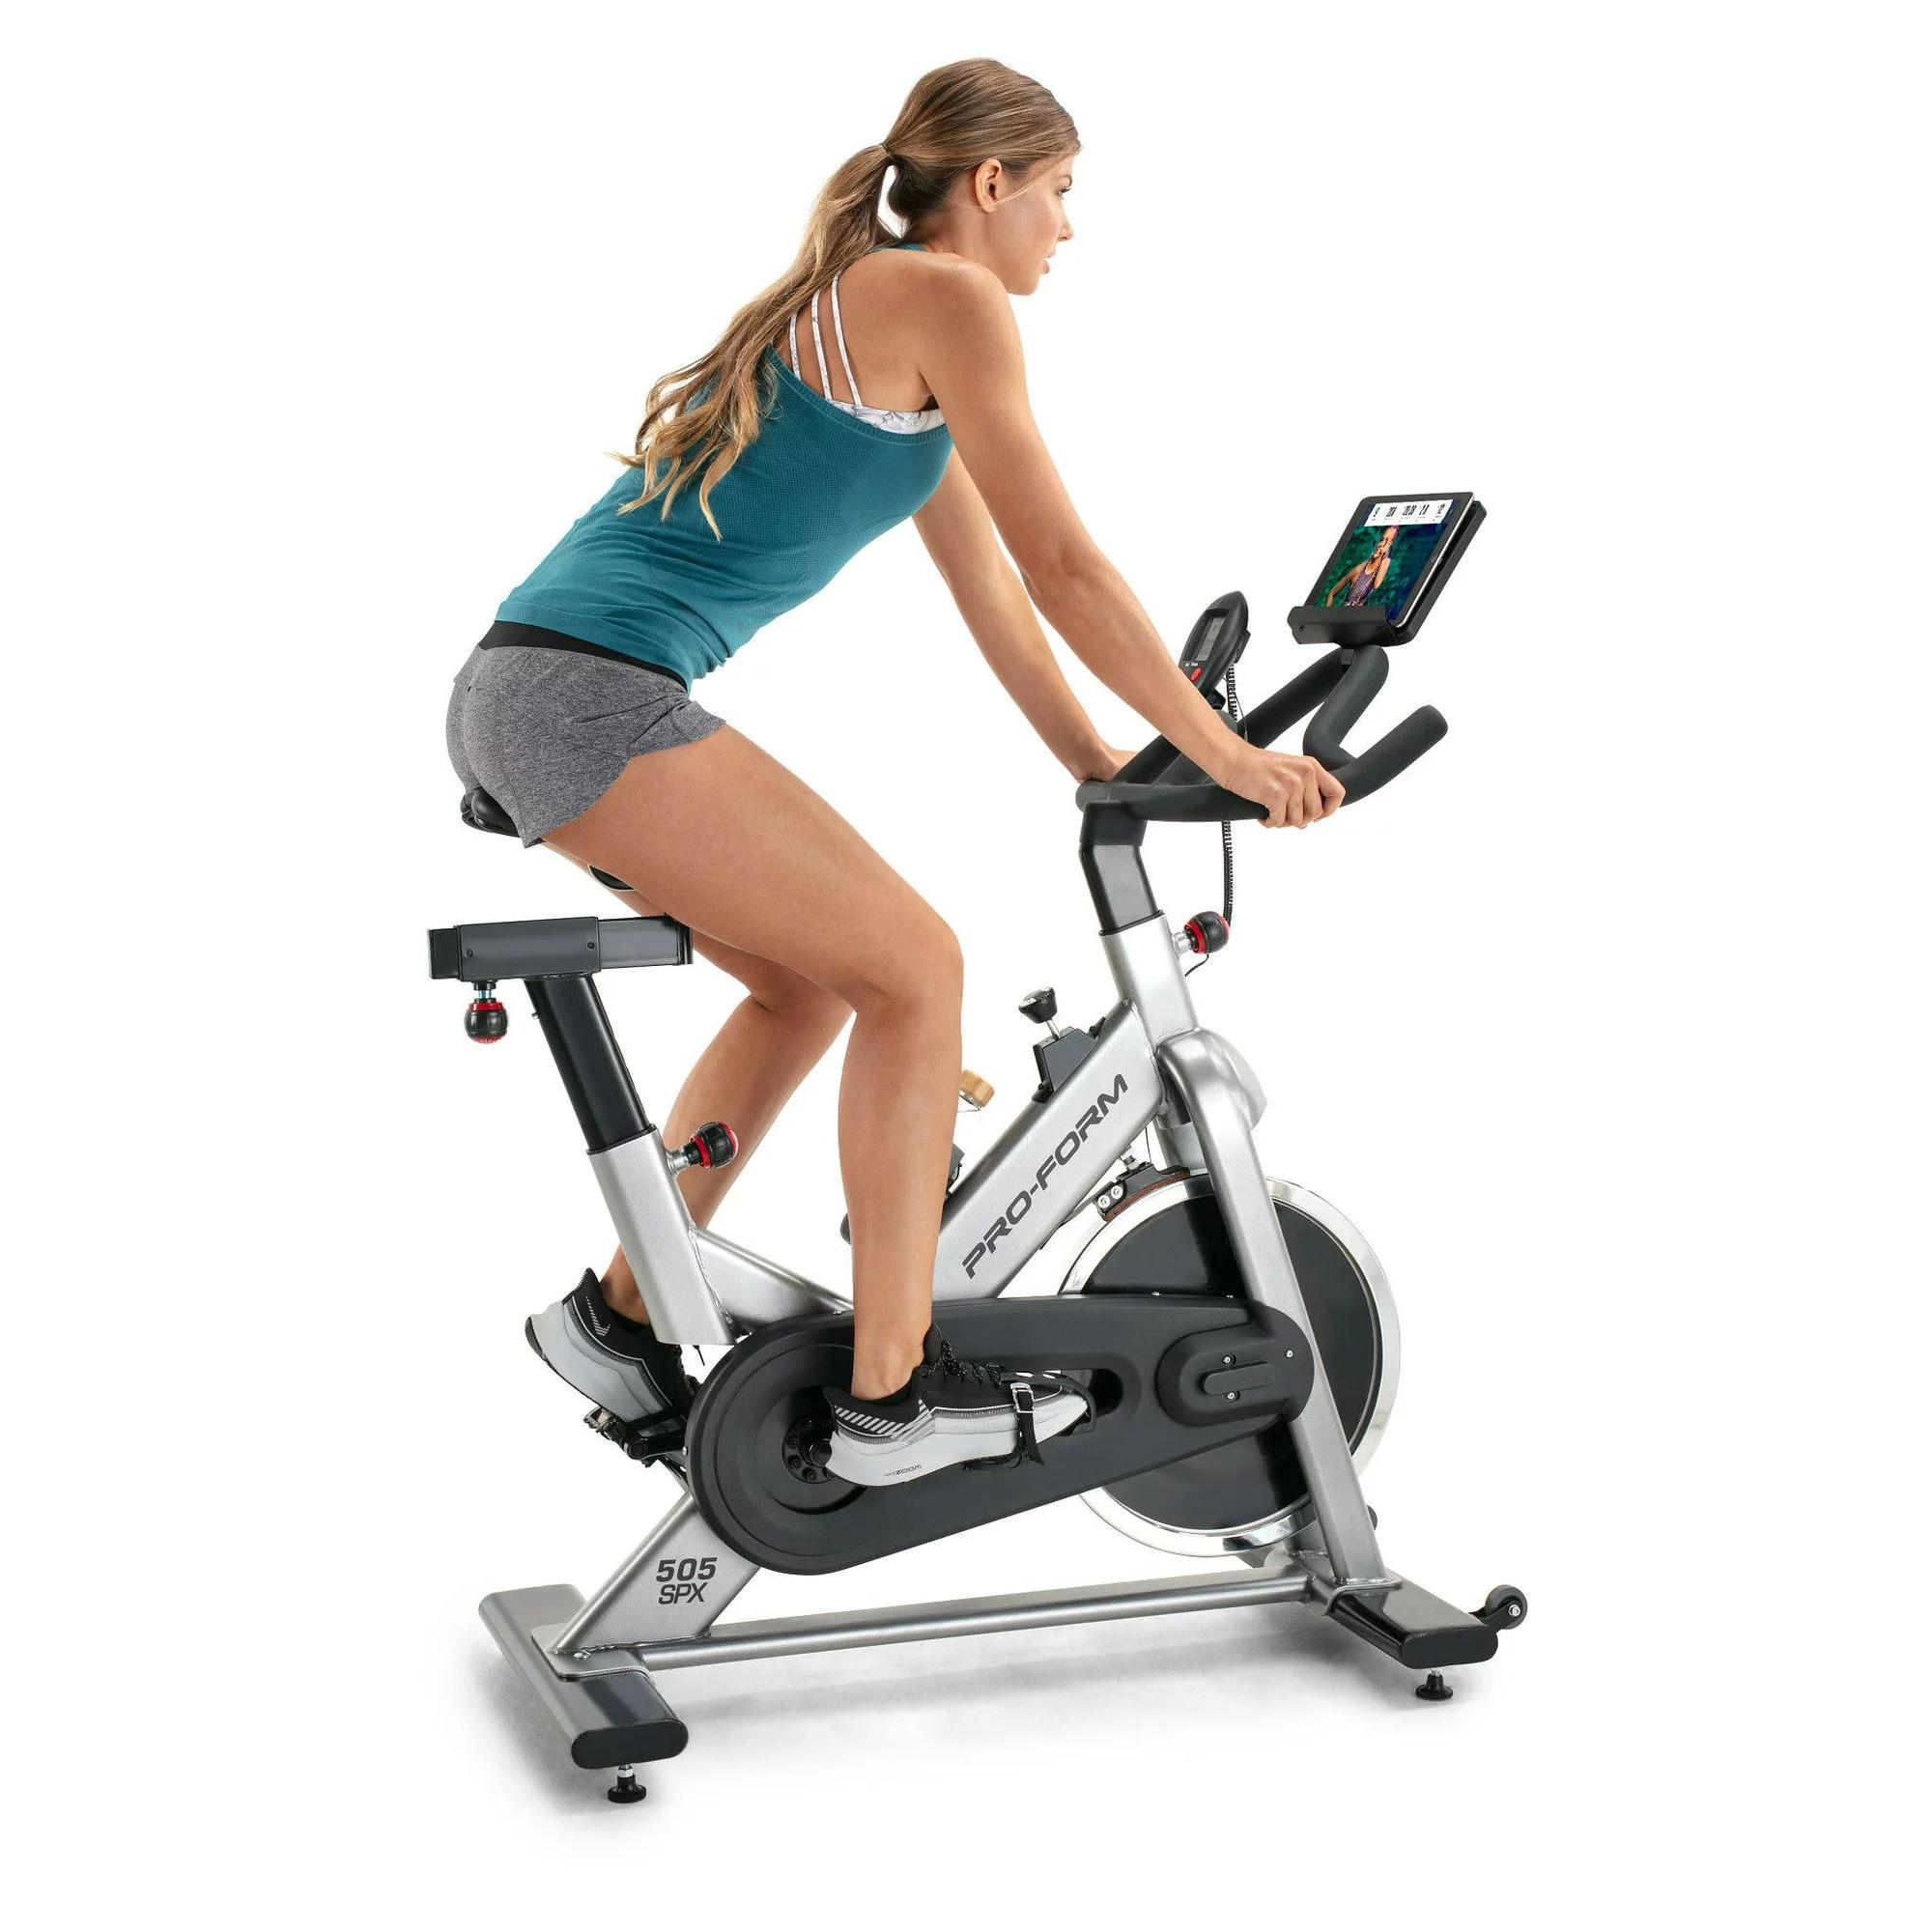 ProForm 505 SPX Indoor Cycle Exercise Bike for $179 Shipped